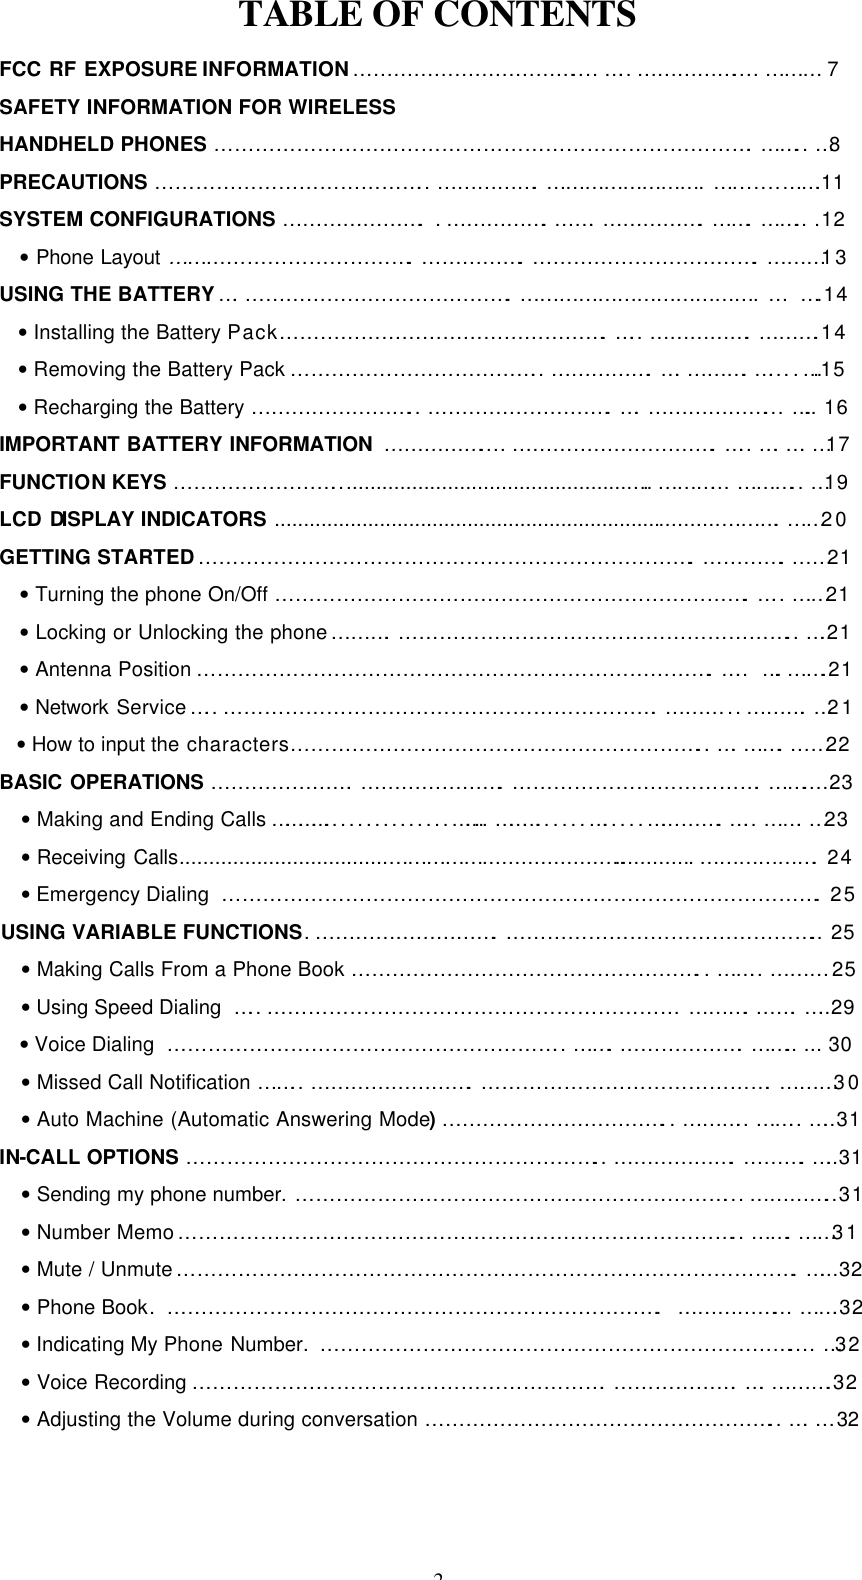 2 TABLE OF CONTENTS FCC RF EXPOSURE INFORMATION…………………………….... …..…………….... ……… 7 SAFETY INFORMATION FOR WIRELESS HANDHELD PHONES …………………………………………………………………….…….. …8 PRECAUTIONS ………………………………….. …………….…………………….….......…….11 SYSTEM CONFIGURATIONS …………………. .…………….…….…………….…….…….. .12 • Phone Layout ……………………………….…………….…………………………….………13 USING THE BATTERY….………………………………….……………………………….… ….14 • Installing the Battery Pack………………………………………….….. …………….……….14 • Removing the Battery Pack ……………………………….. …………….….……….…....….15 • Recharging the Battery …………………….. ……………………….….………………... ….. 16 IMPORTANT BATTERY INFORMATION …………….... ………………………….….. ….….…17 FUNCTION KEYS ……………………..................................................….………... ……….. …19 LCD DISPLAY INDICATORS ............................................................................……….……20 GETTING STARTED……………………………………………………………….………….……21   • Turning the phone On/Off …………………………………………………………….….. ……21 • Locking or Unlocking the phone……….………………………………………………….. ….21 • Antenna Position ………………………………………………………………….…..  ….…….21 • Network Service…..……………………………………………………….……… ..……….…21 • How to input the characters…………………………………………………….. ….…….……22 BASIC OPERATIONS ………………….………………….……………………………….……....23 • Making and Ending Calls …………...............…….. ………......….....………….….. …….…23 • Receiving Calls...................................……………...................…............. ………………. 24 • Emergency Dialing  ……………………………………………………………………………. 25 USING VARIABLE FUNCTIONS.……………………….……………………………………….. 25 • Making Calls From a Phone Book ……………………………………………..…….. ……… 25  • Using Speed Dialing  ….. …………………………………………………… ……….…….…..29  • Voice Dialing  ………………………………………………….. …….……………….…….. ... 30 • Missed Call Notification …….. …………………….…………………………………….………30 • Auto Machine (Automatic Answering Mode)……………………………..……….. …….. …..31 IN-CALL OPTIONS …………………………………………………….. ……………….……….…..31  • Sending my phone number. ………………………………………………………...…………..31  • Number Memo……………………………………………………………………….. …….……31  • Mute / Unmute……………………………………………………………………………….…...32 • Phone Book. ………………………………………………………………. ……………... …….32 • Indicating My Phone Number. …………………………………………………………….... …32 • Voice Recording …………………………………………………….……………….….……….32 • Adjusting the Volume during conversation …………………………………………….. ….…  32 